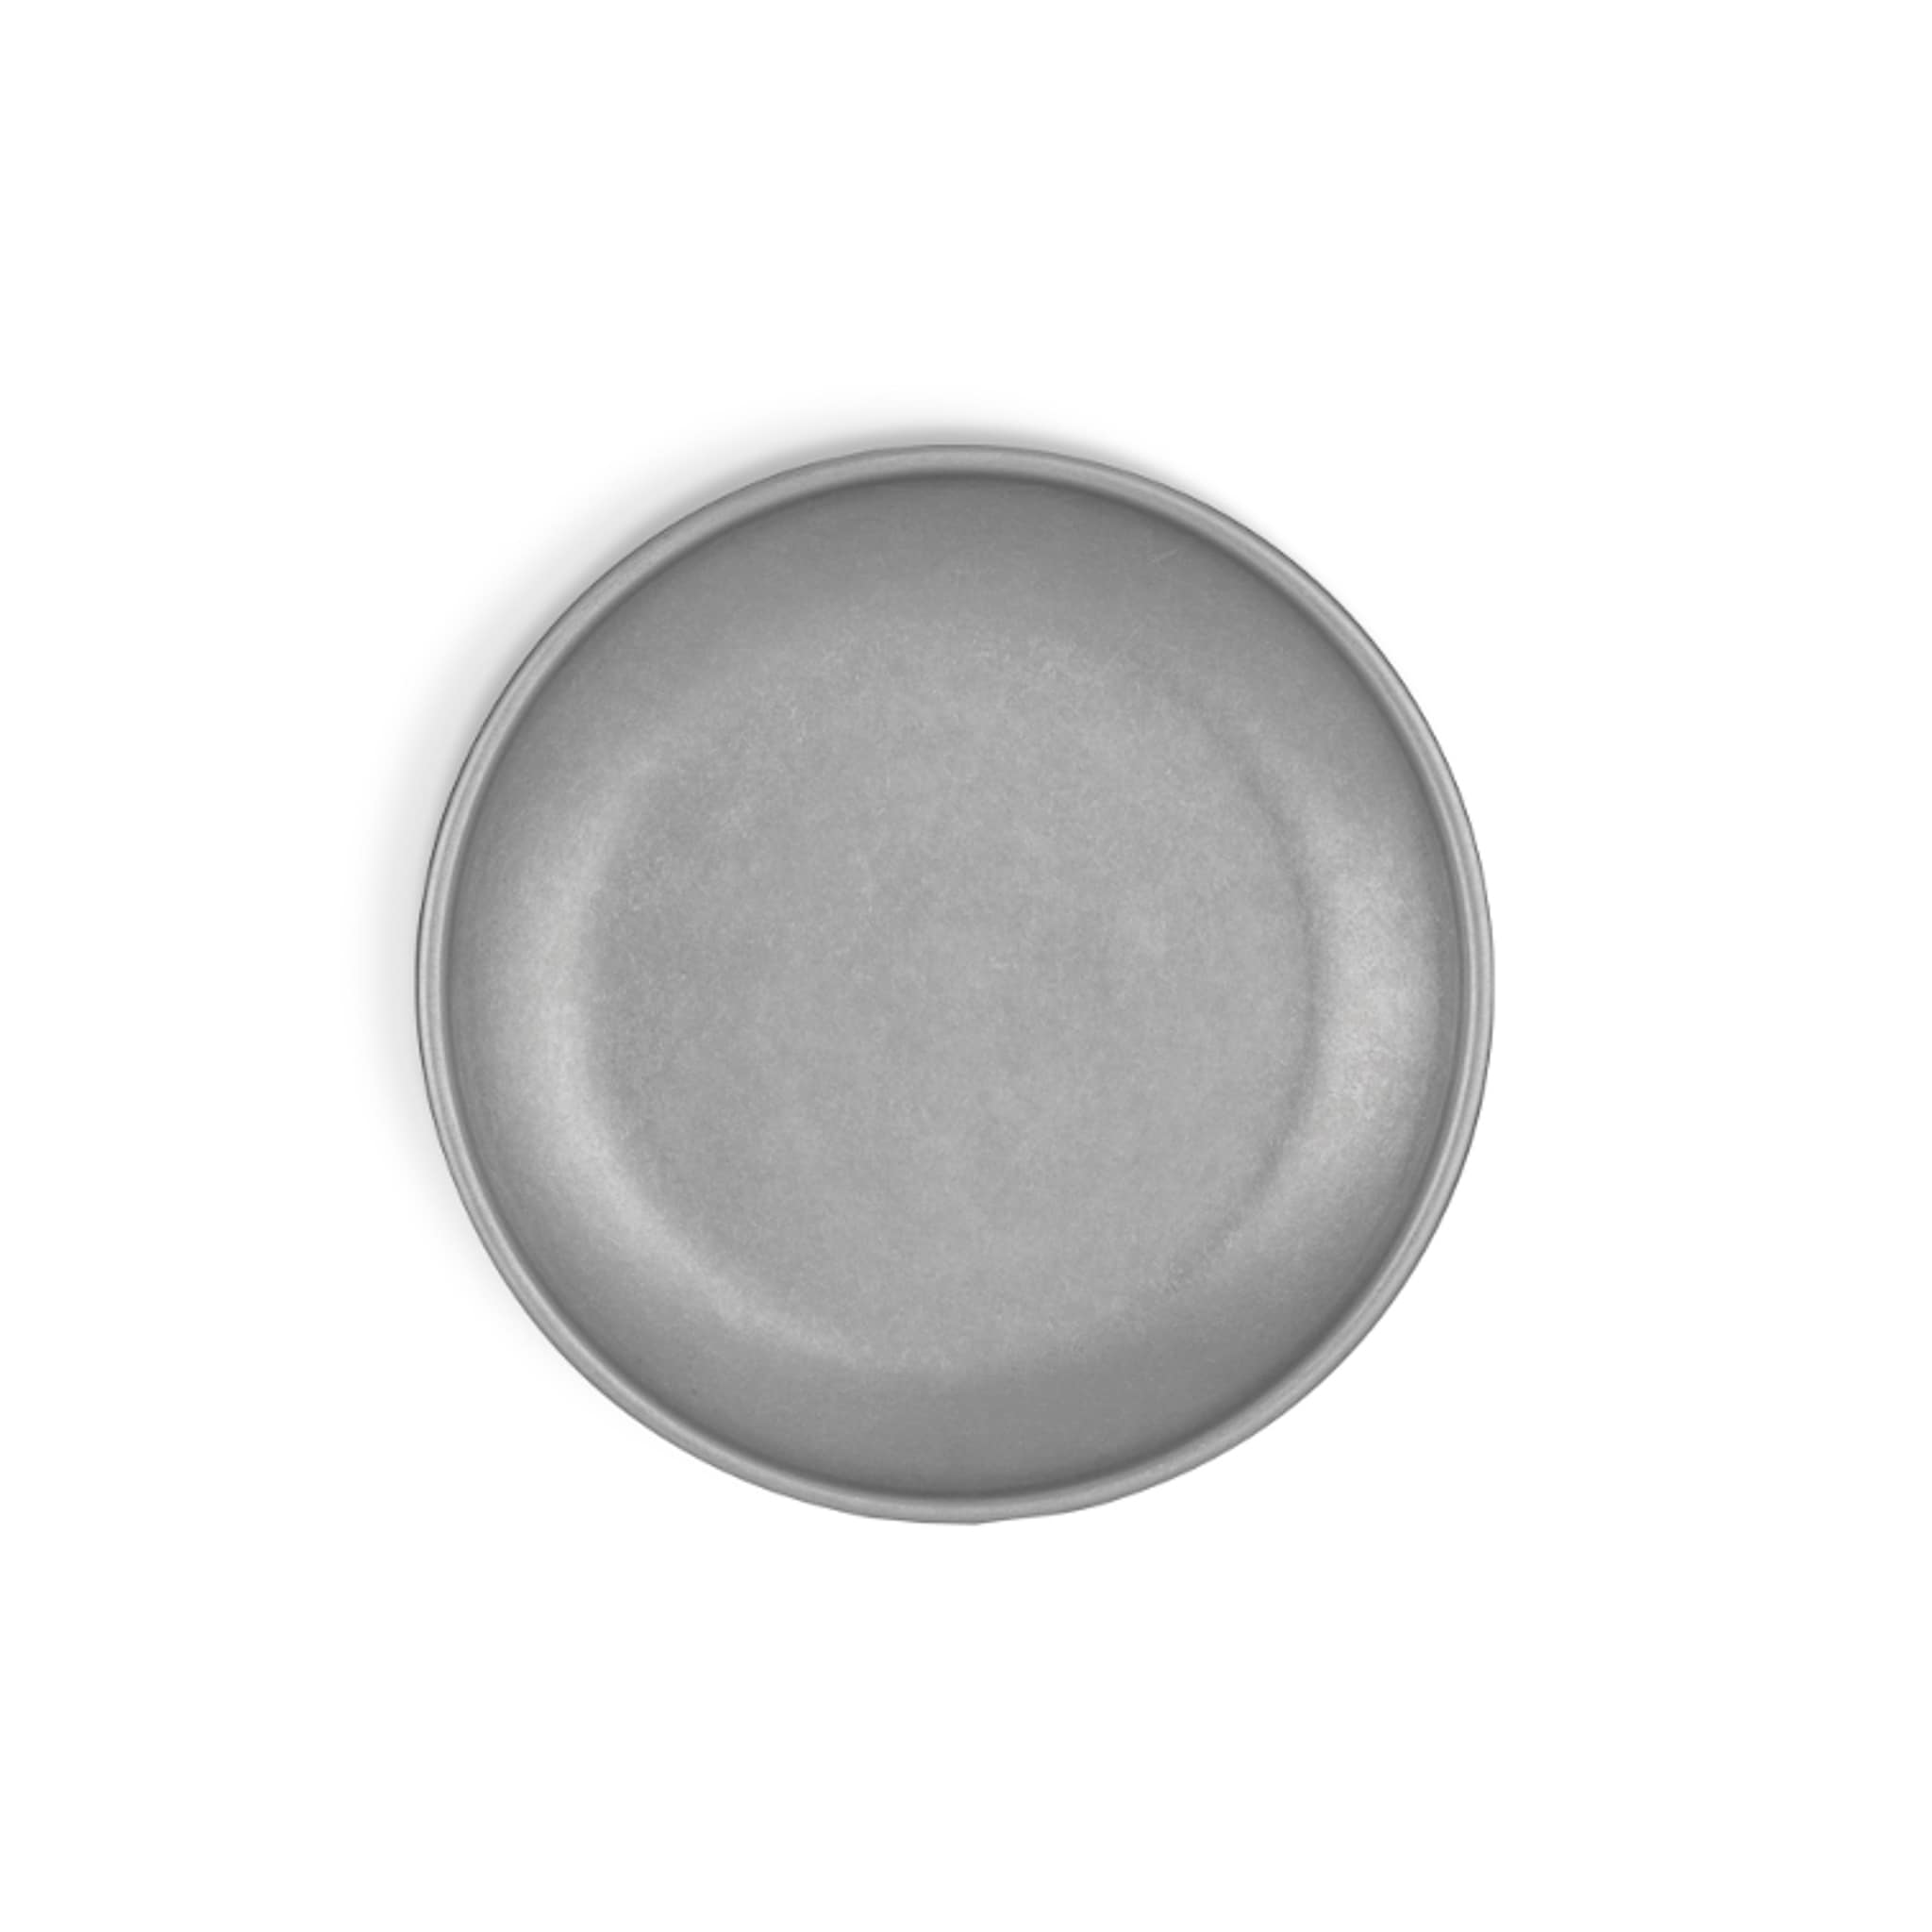 Vintage Style Stainless Steel Bread Plate, 14cm